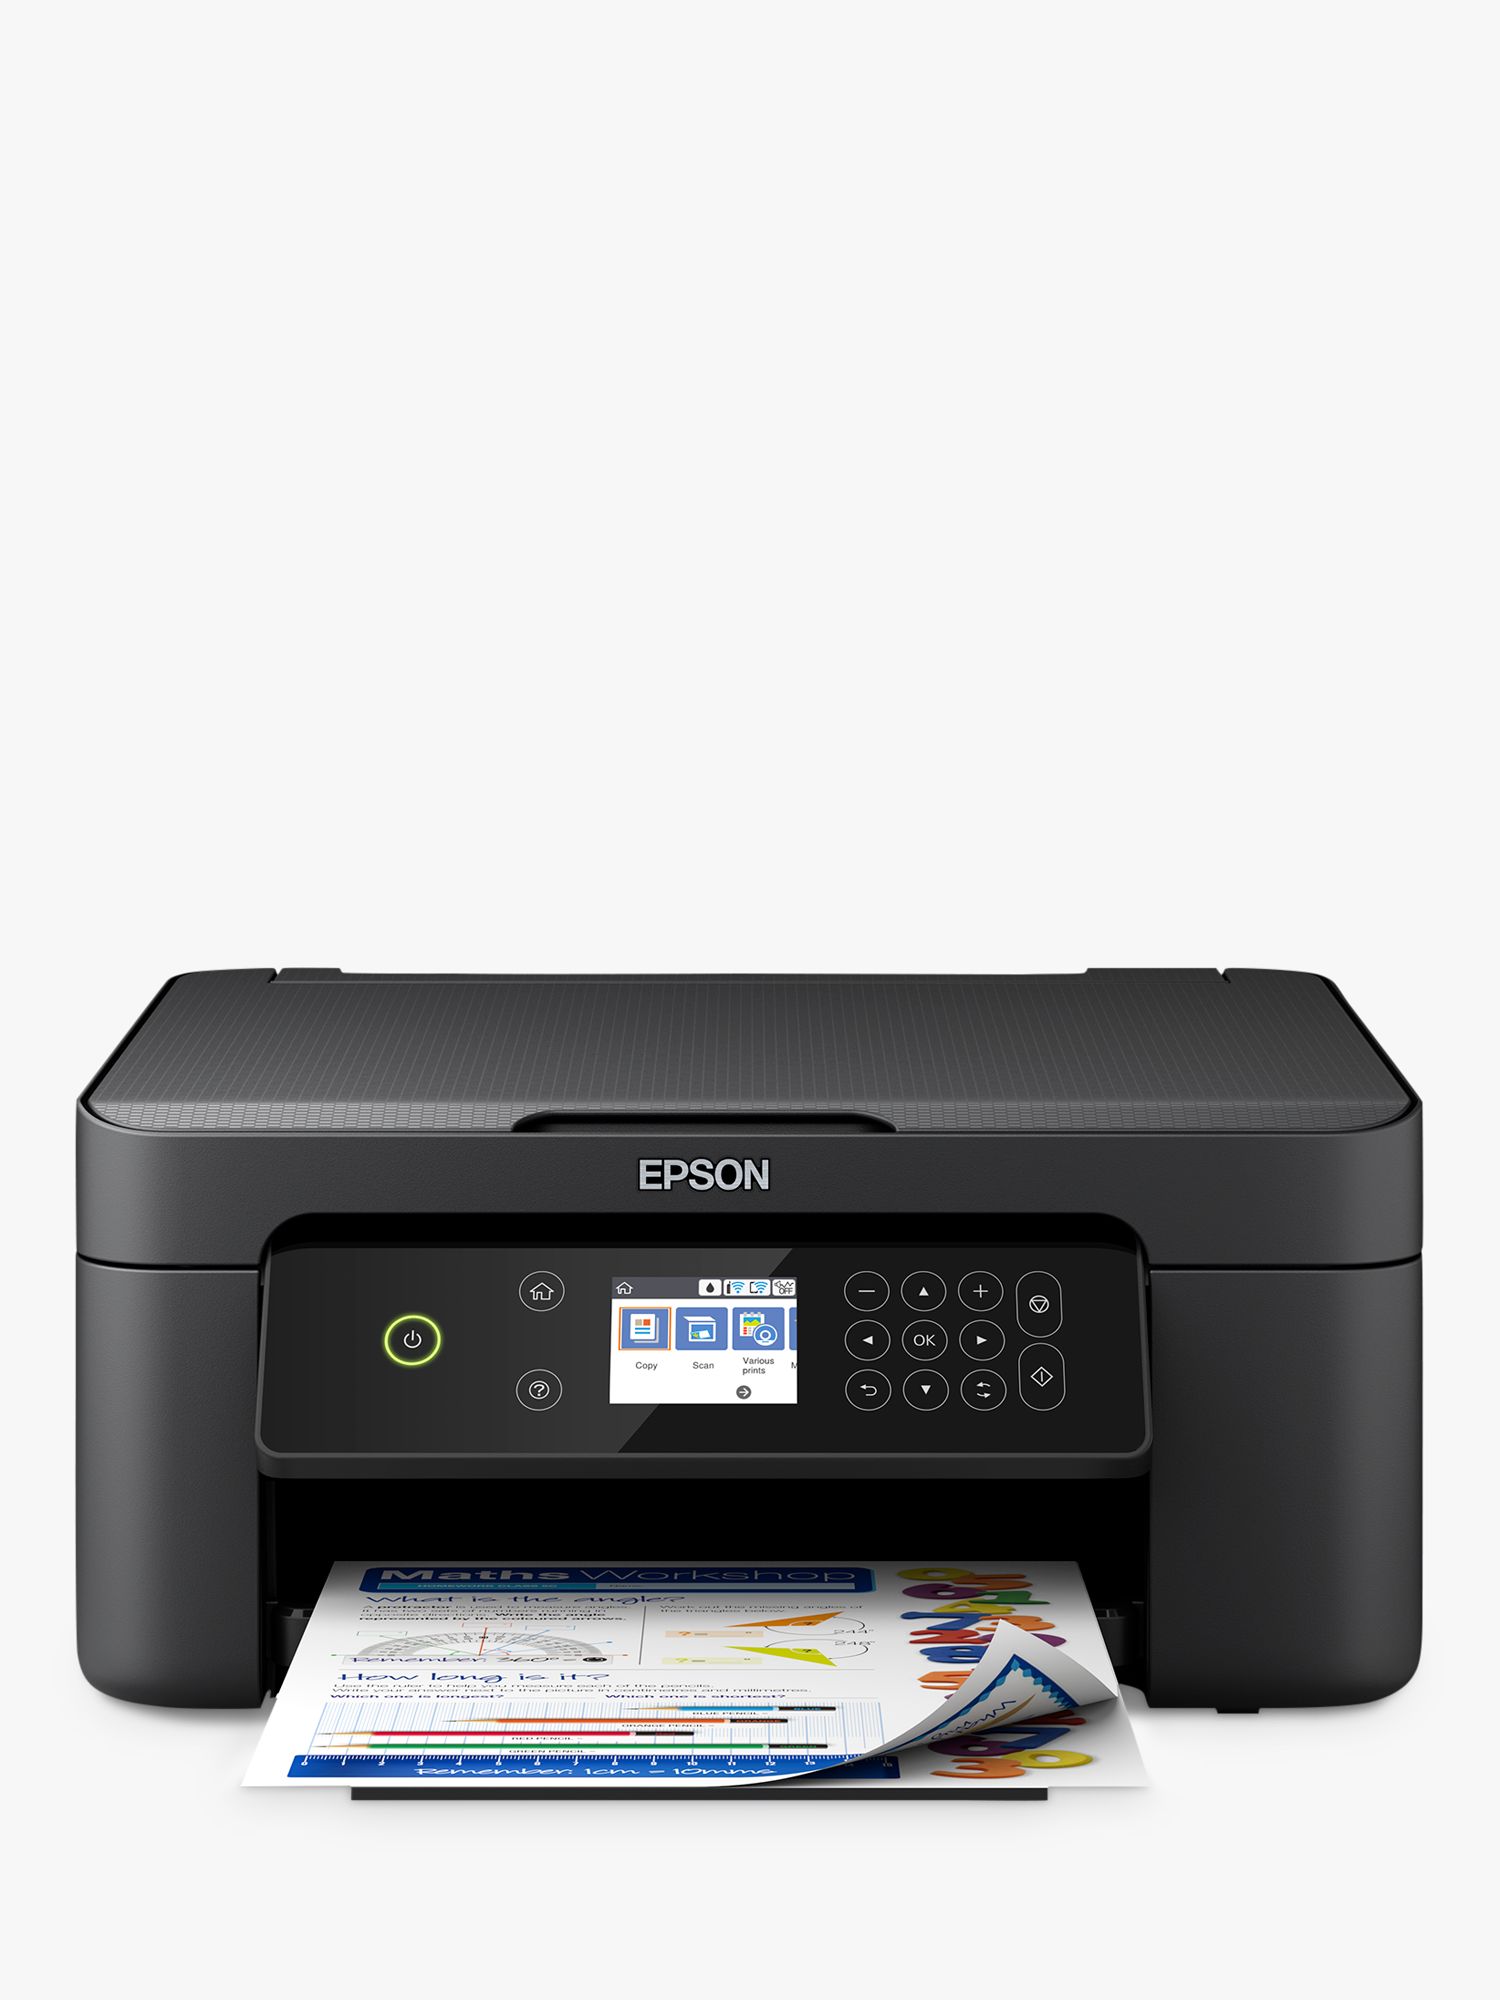 Epson Expression Home Xp 4100 Wi Fi Three In One Printer Black At John Lewis Partners